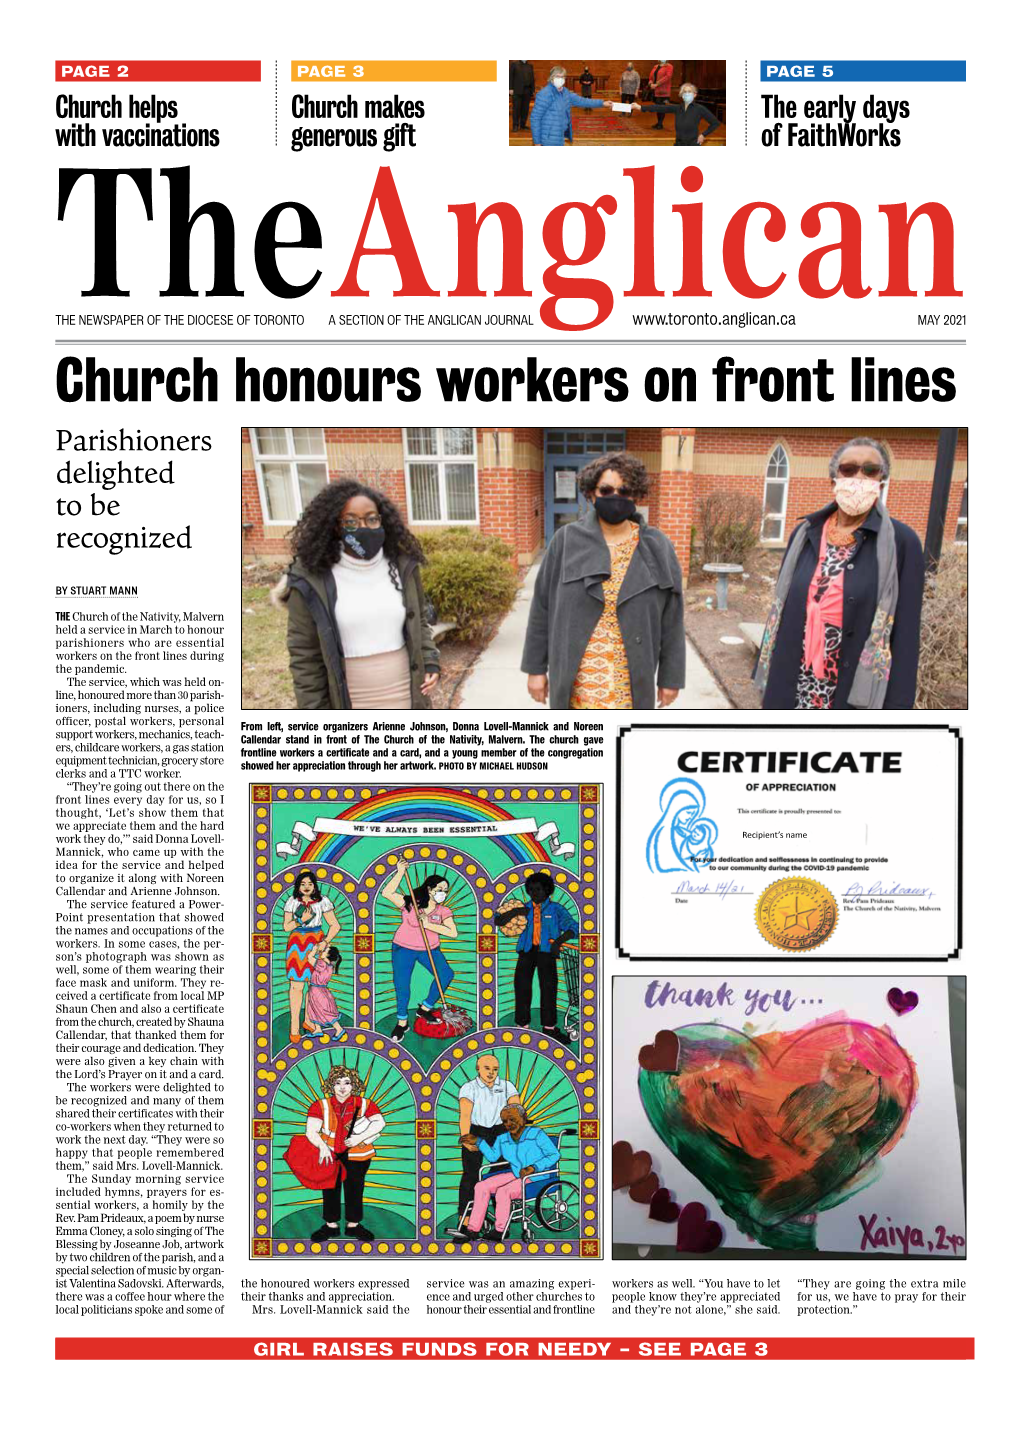 Church Honours Workers on Front Lines Parishioners Delighted to Be Recognized